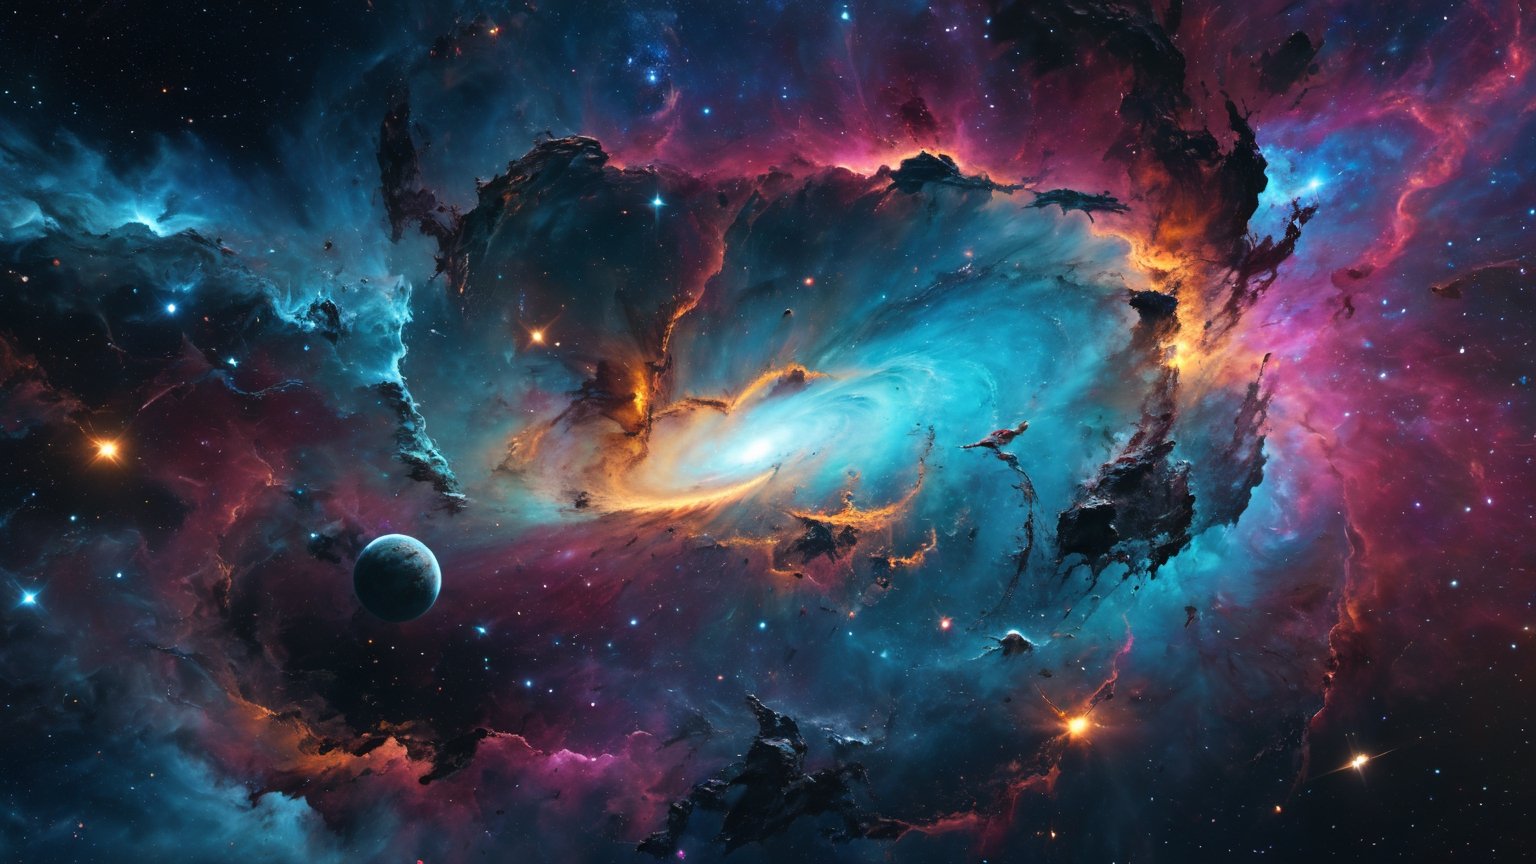 ultra realistic 8k cg,  flawless,  clean,  masterpiece,  professional artwork,  famous artwork,  cinematic lighting,  cinematic bloom,  abstract and colorful paint style,  background focus, ,  vast galaxy,  cosmic energy,  alien planet,  painted world,  colorful splashes, (((limitless desolation))),  deep space,  floating,  ((no characters)),  , DonMC3l3st14l3xpl0r3rsXL, Sci-fi